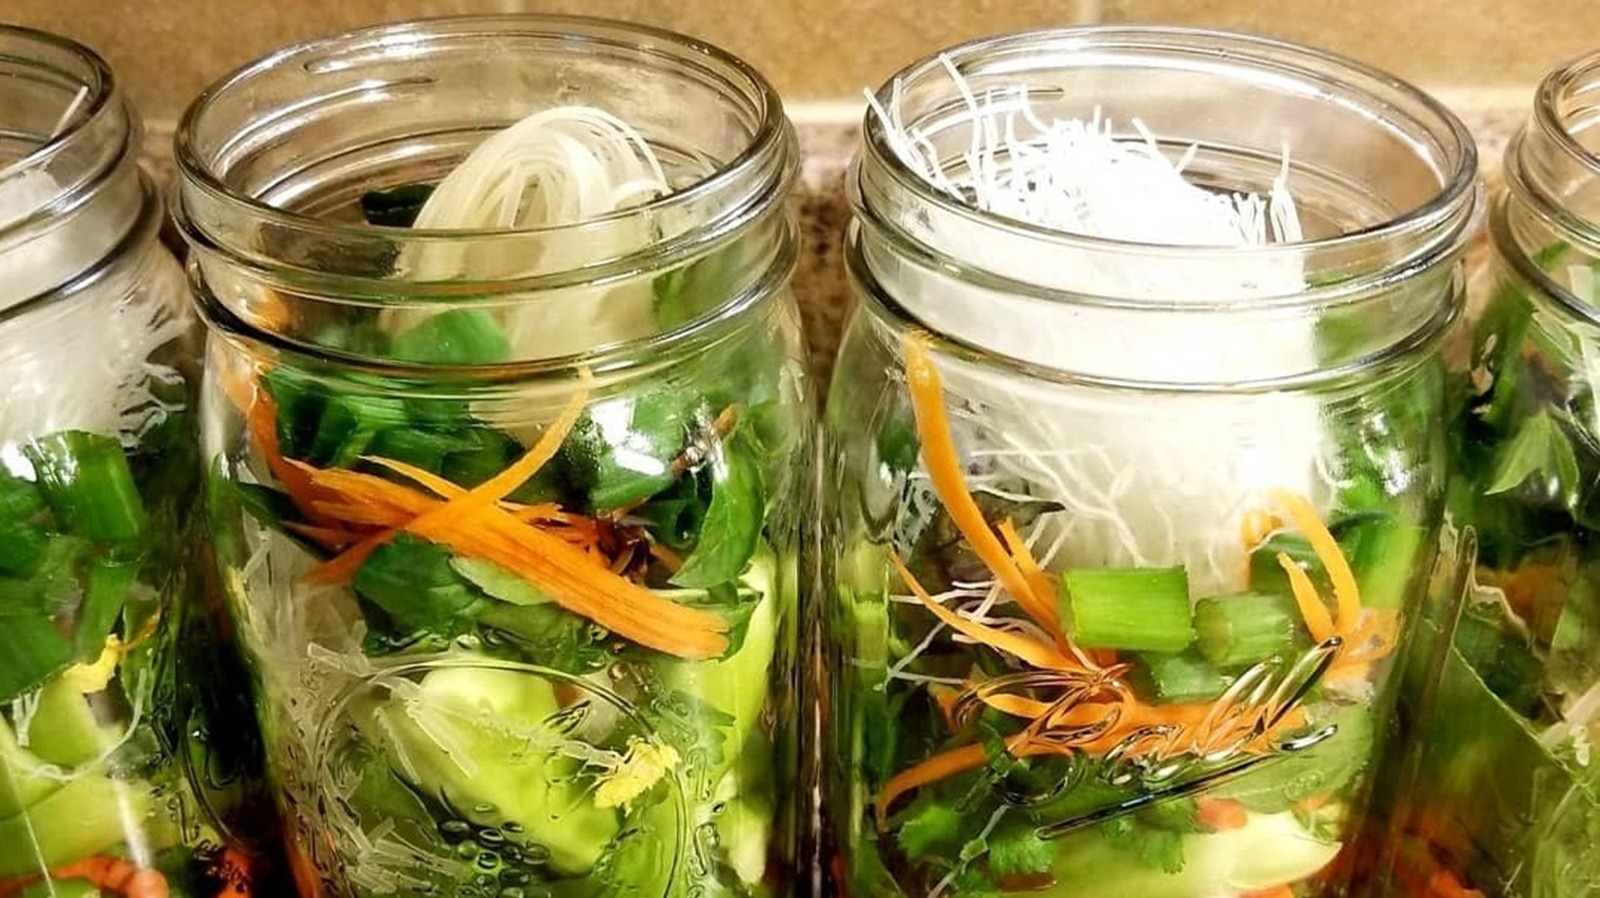 https://www.tastingtable.com/img/gallery/when-filling-mason-jars-with-hot-soup-be-sure-to-warm-the-glass-first/l-intro-1699549773.jpg